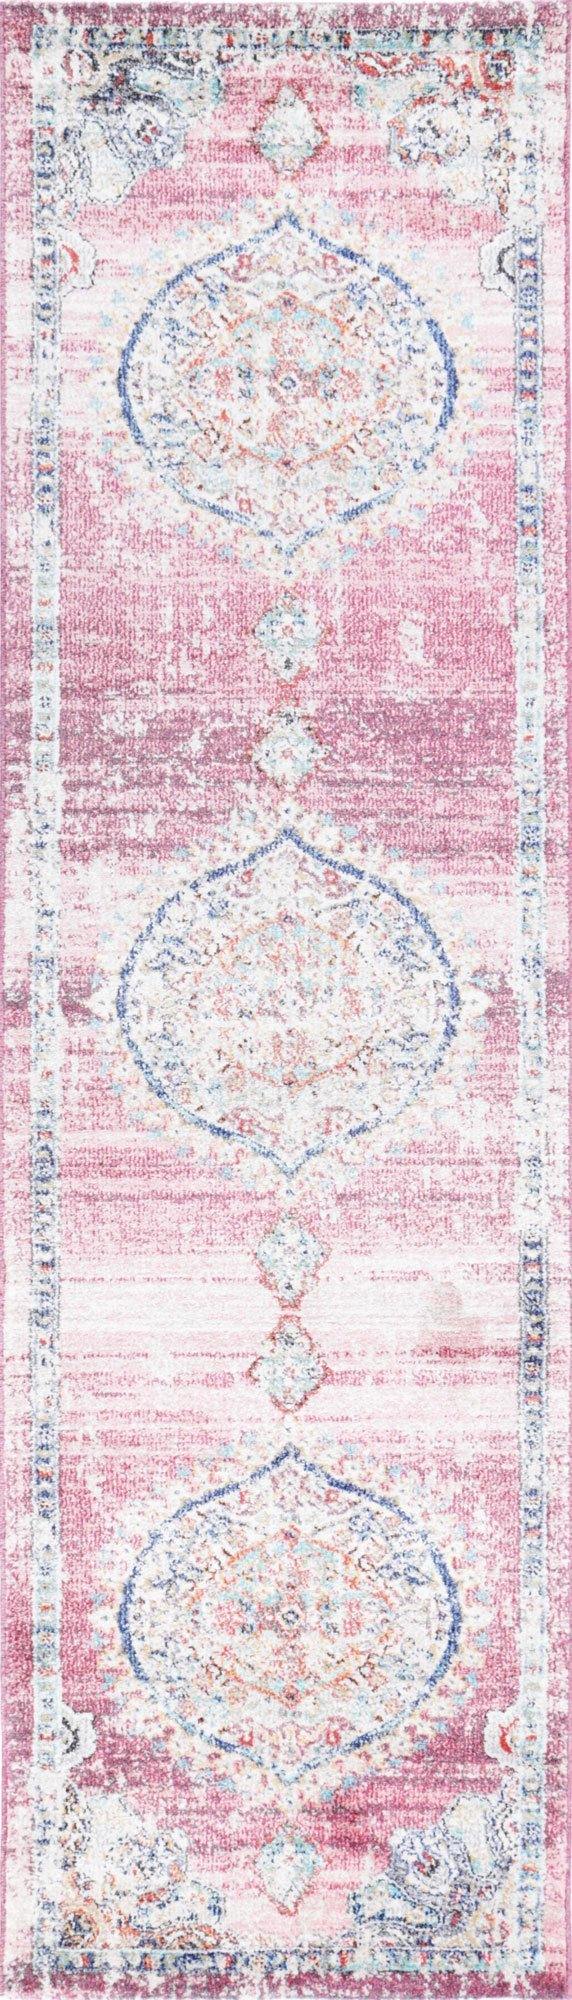 Clara Hollow Medalion Transitional Blush Rug - The Rugs